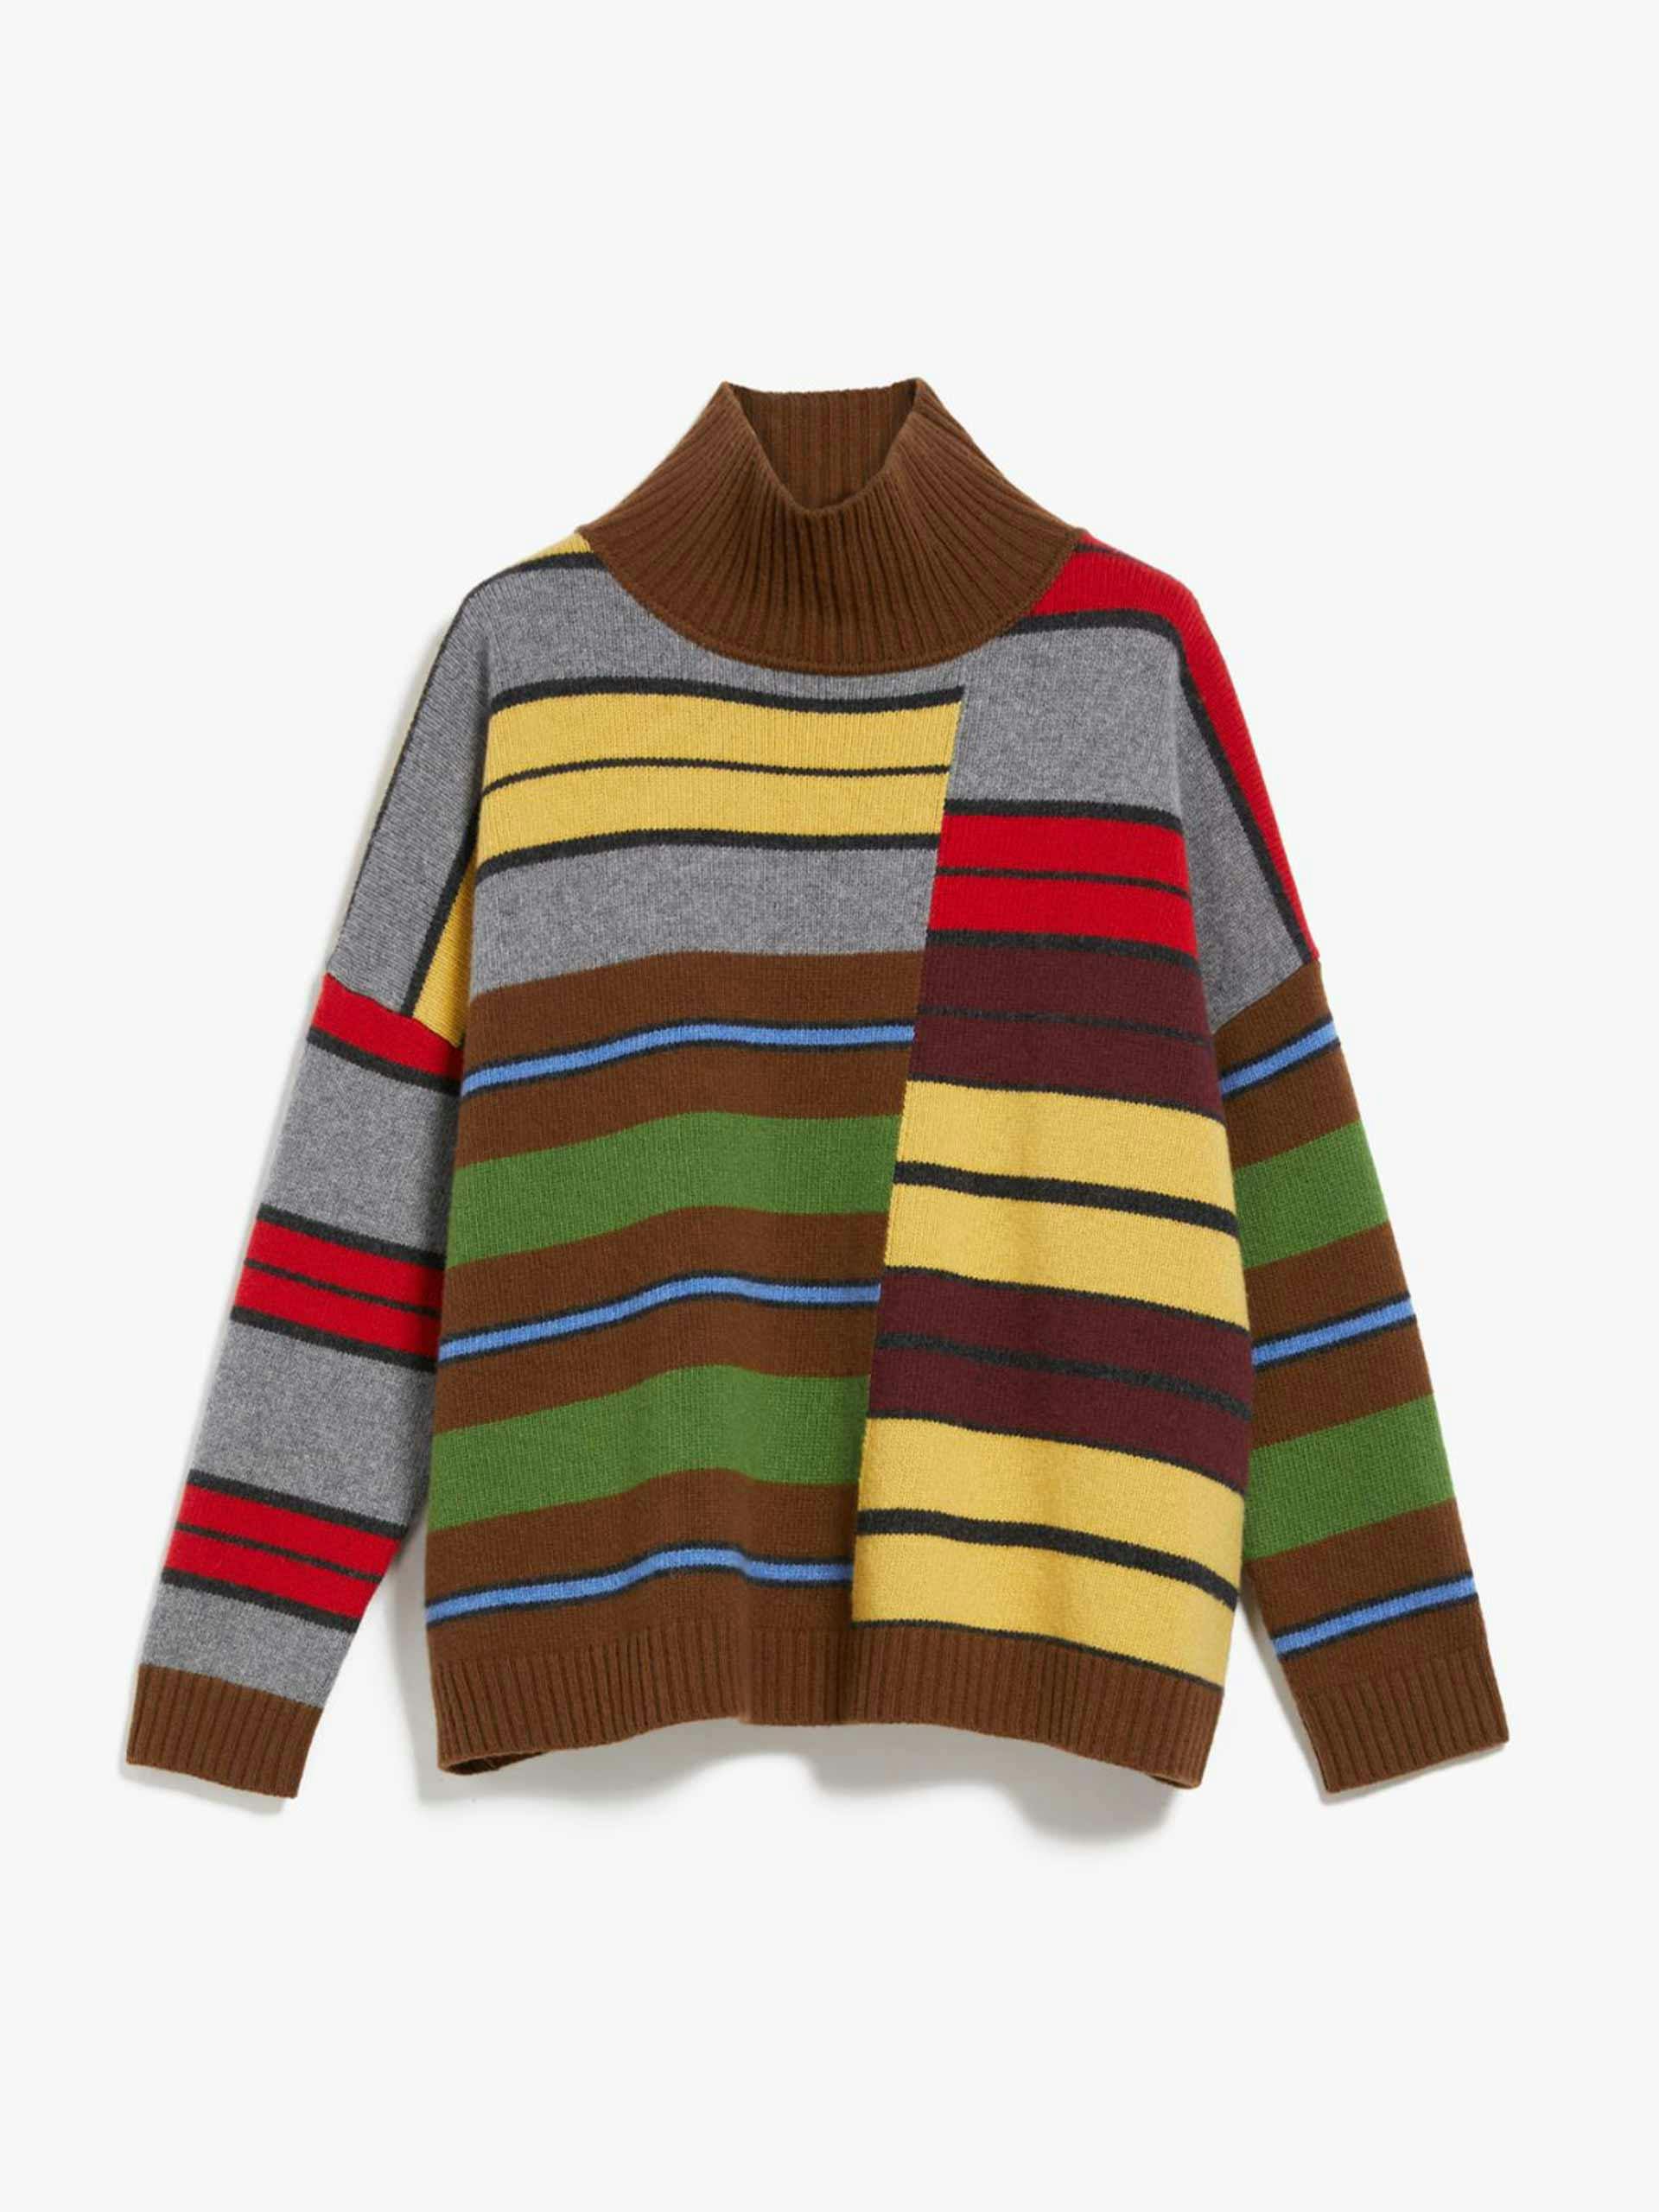 Carded wool sweater